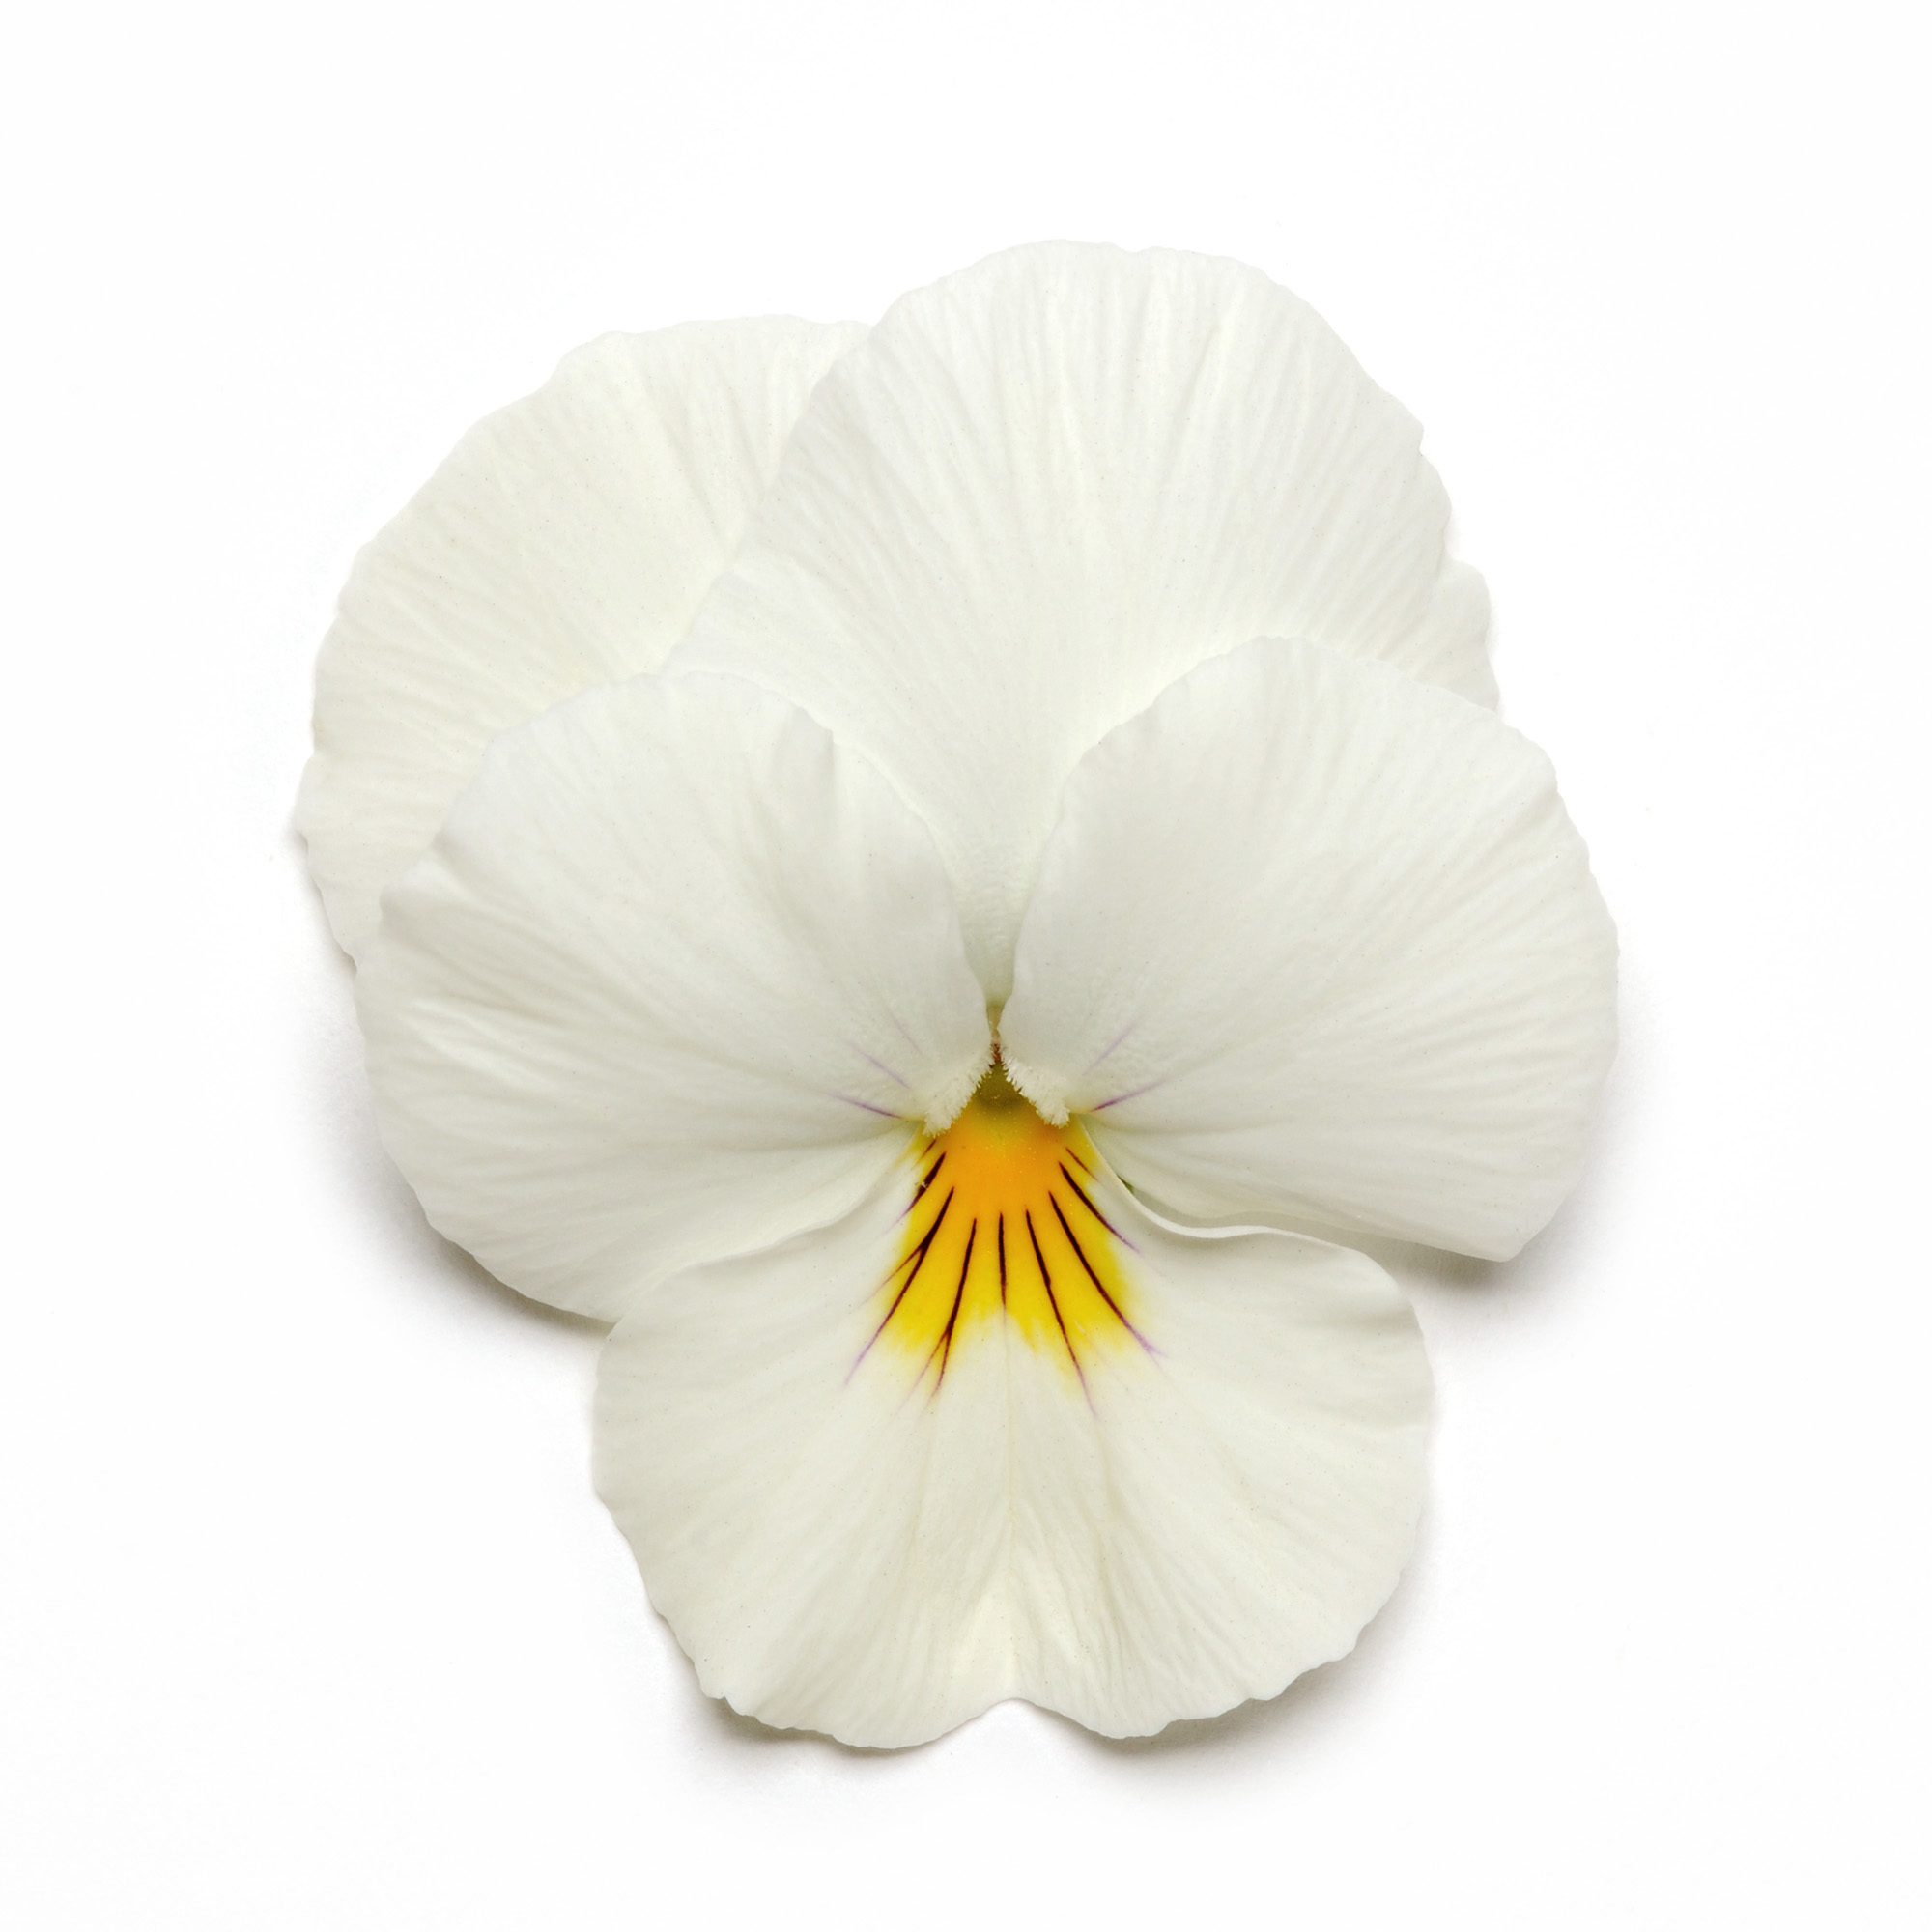 Pansy Cool Wave White Hanging Baskets